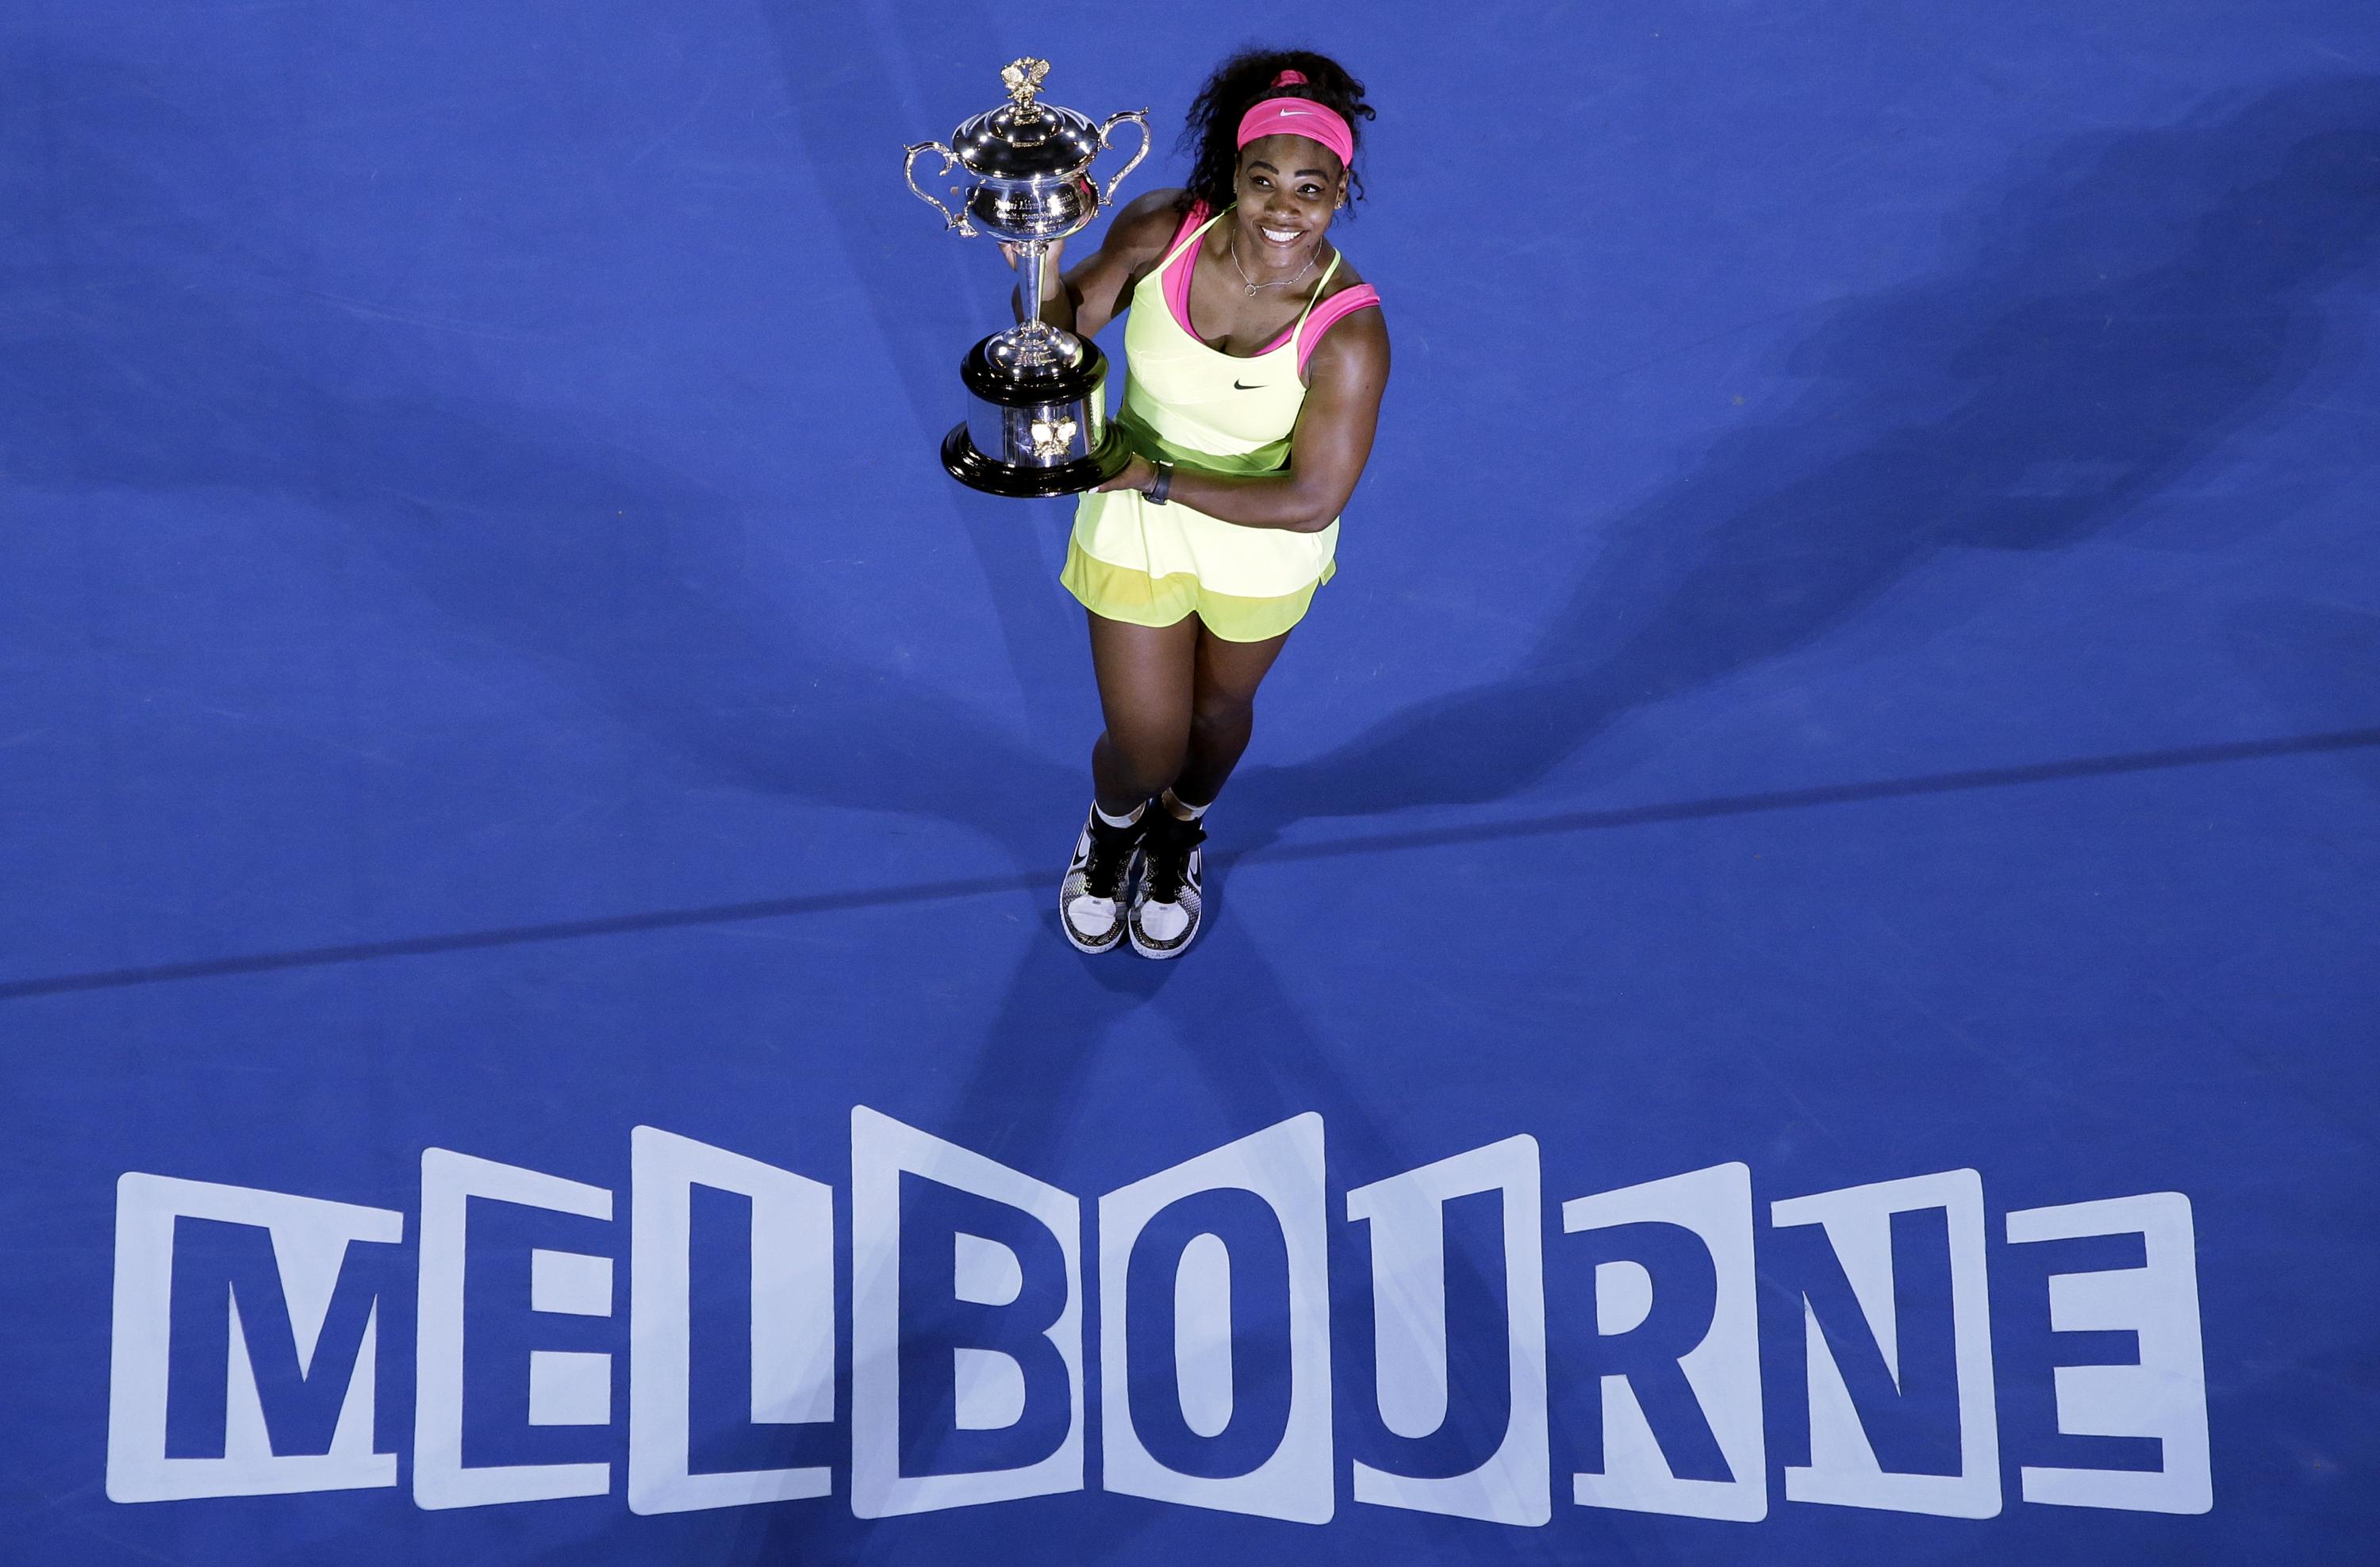 Serena Williams: 23 Grand Slam singles titles and much more.